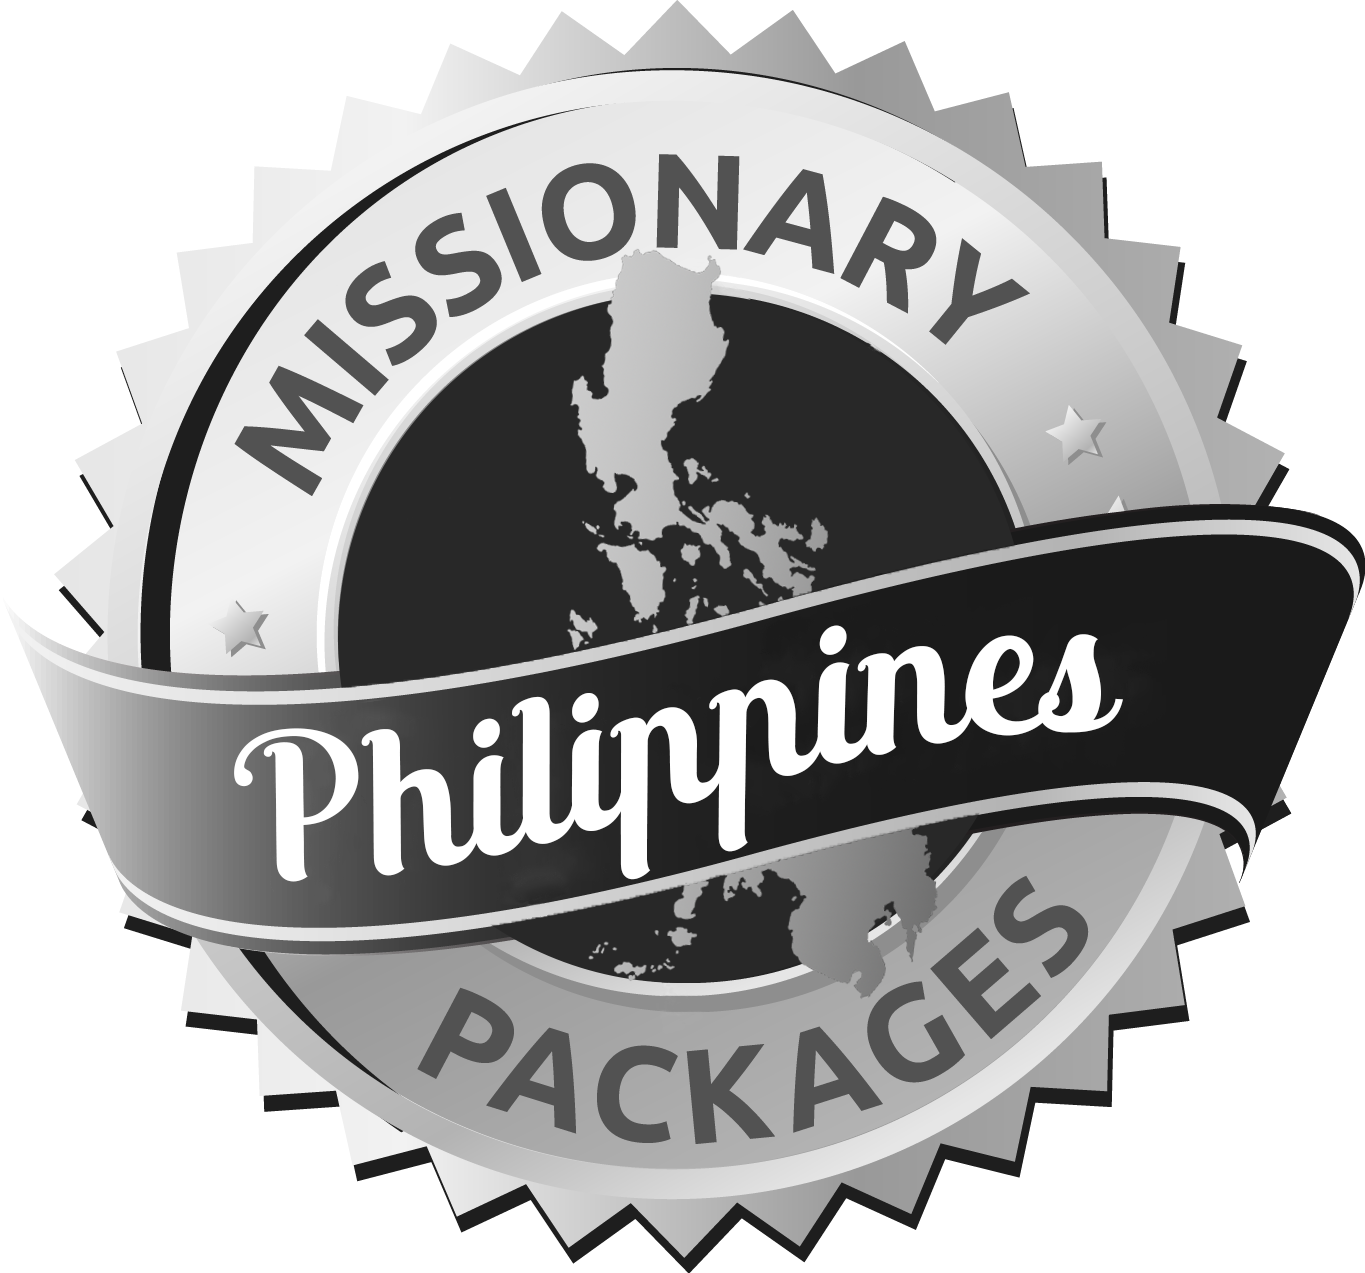 Missionary Packages Philippines